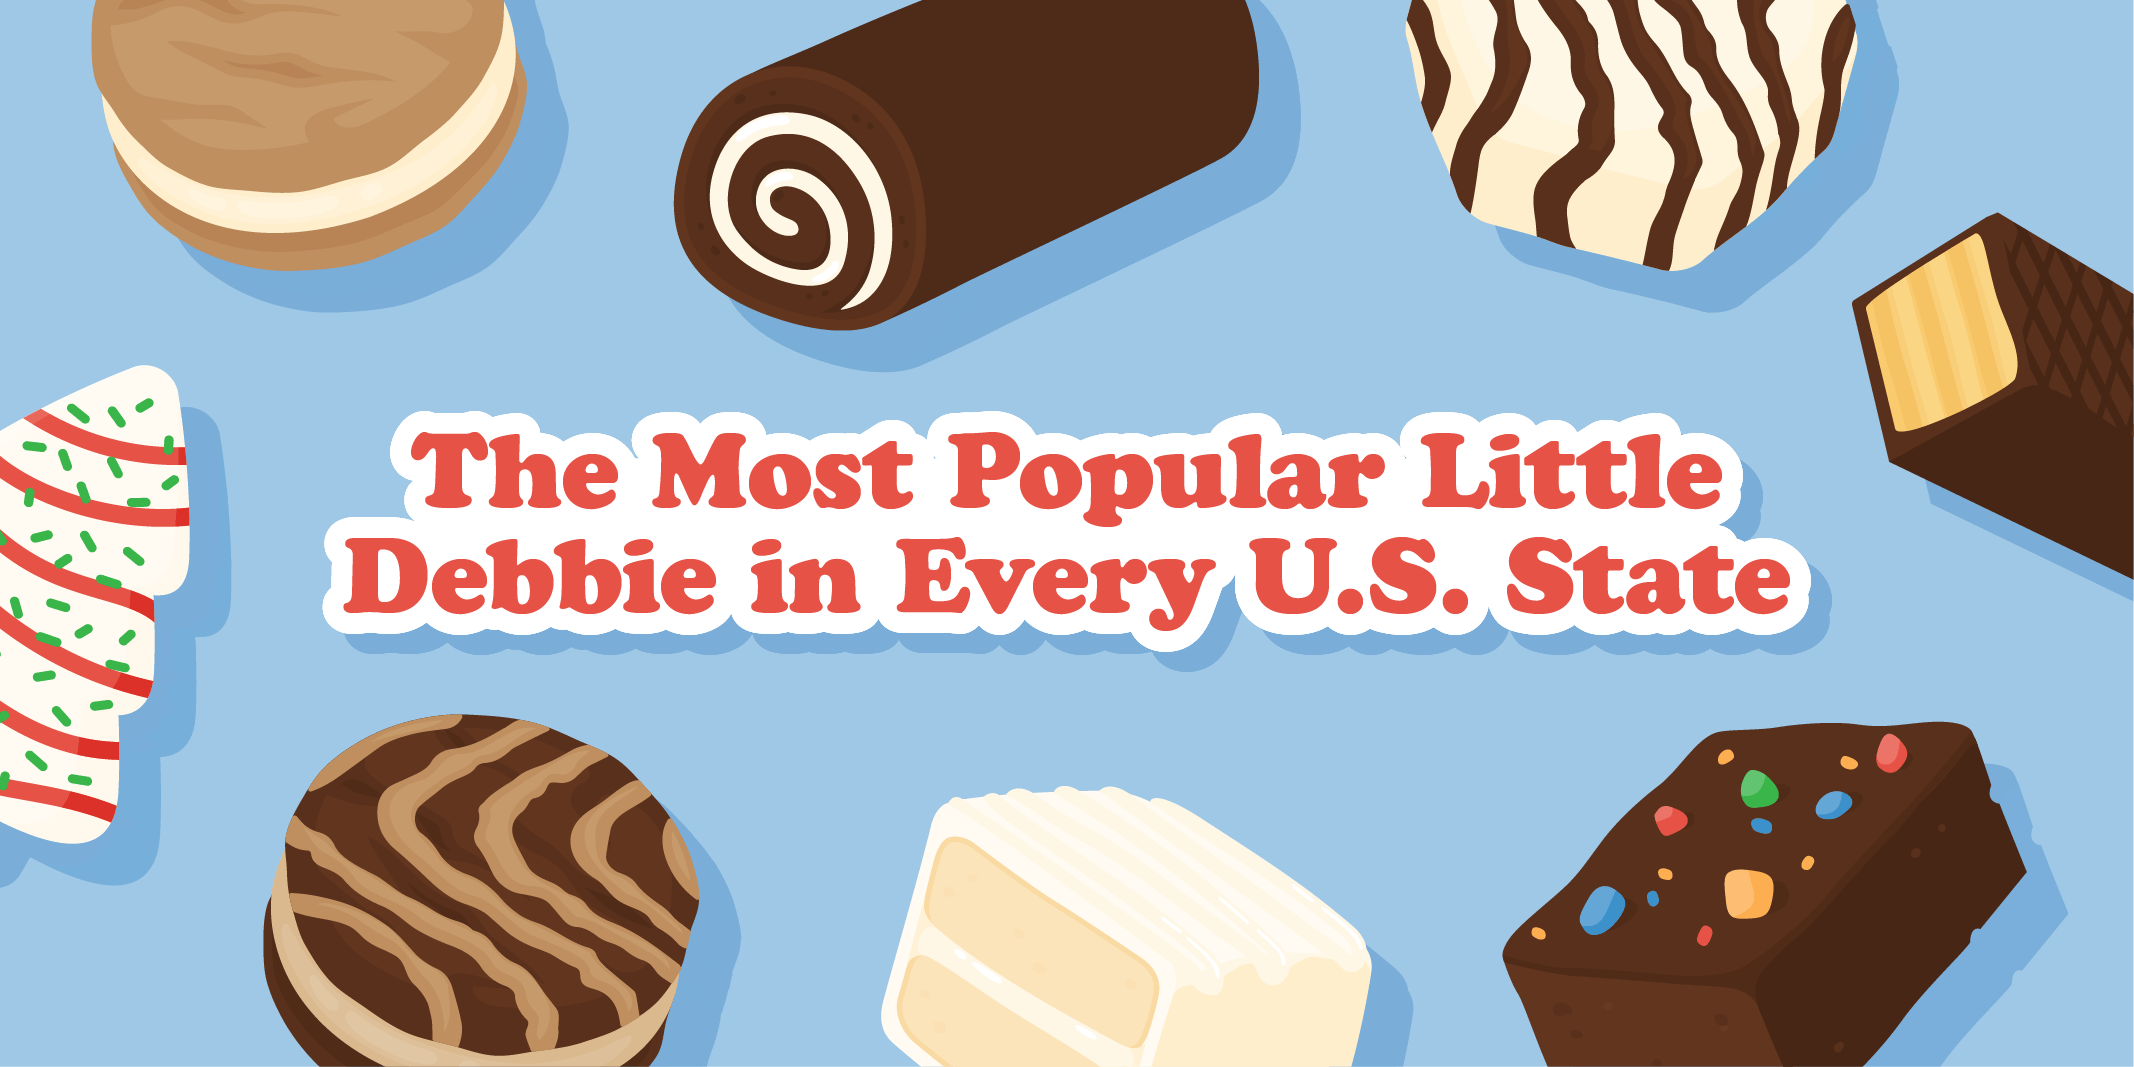 A header image for a blog about Little Debbie popularity around the U.S.